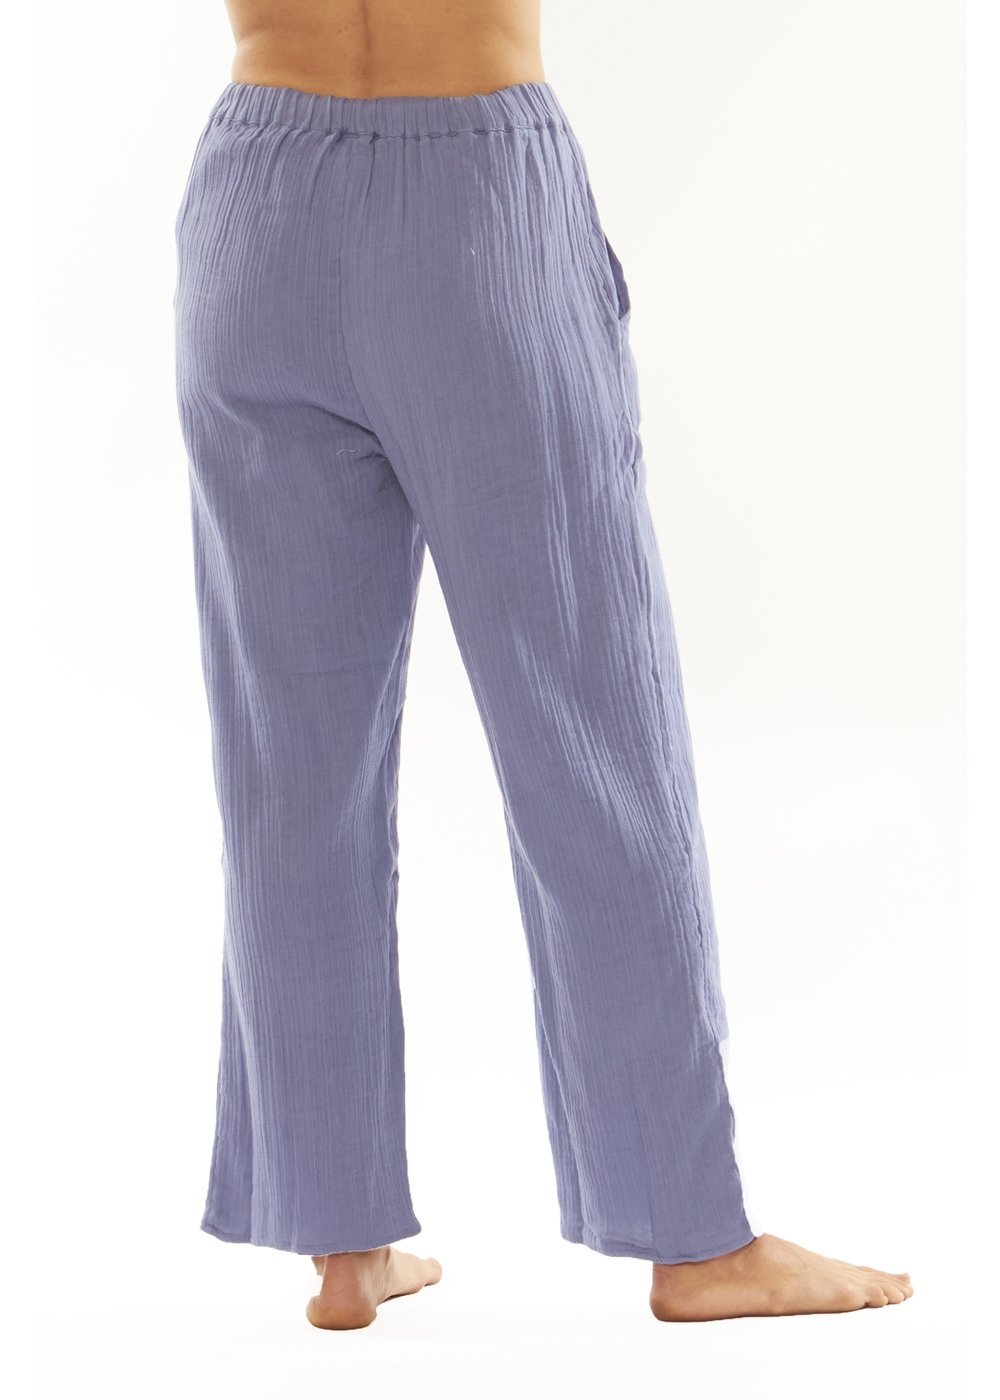 Sisstrevolution MAMA MIA PANT-BRS - Stoke Outlets